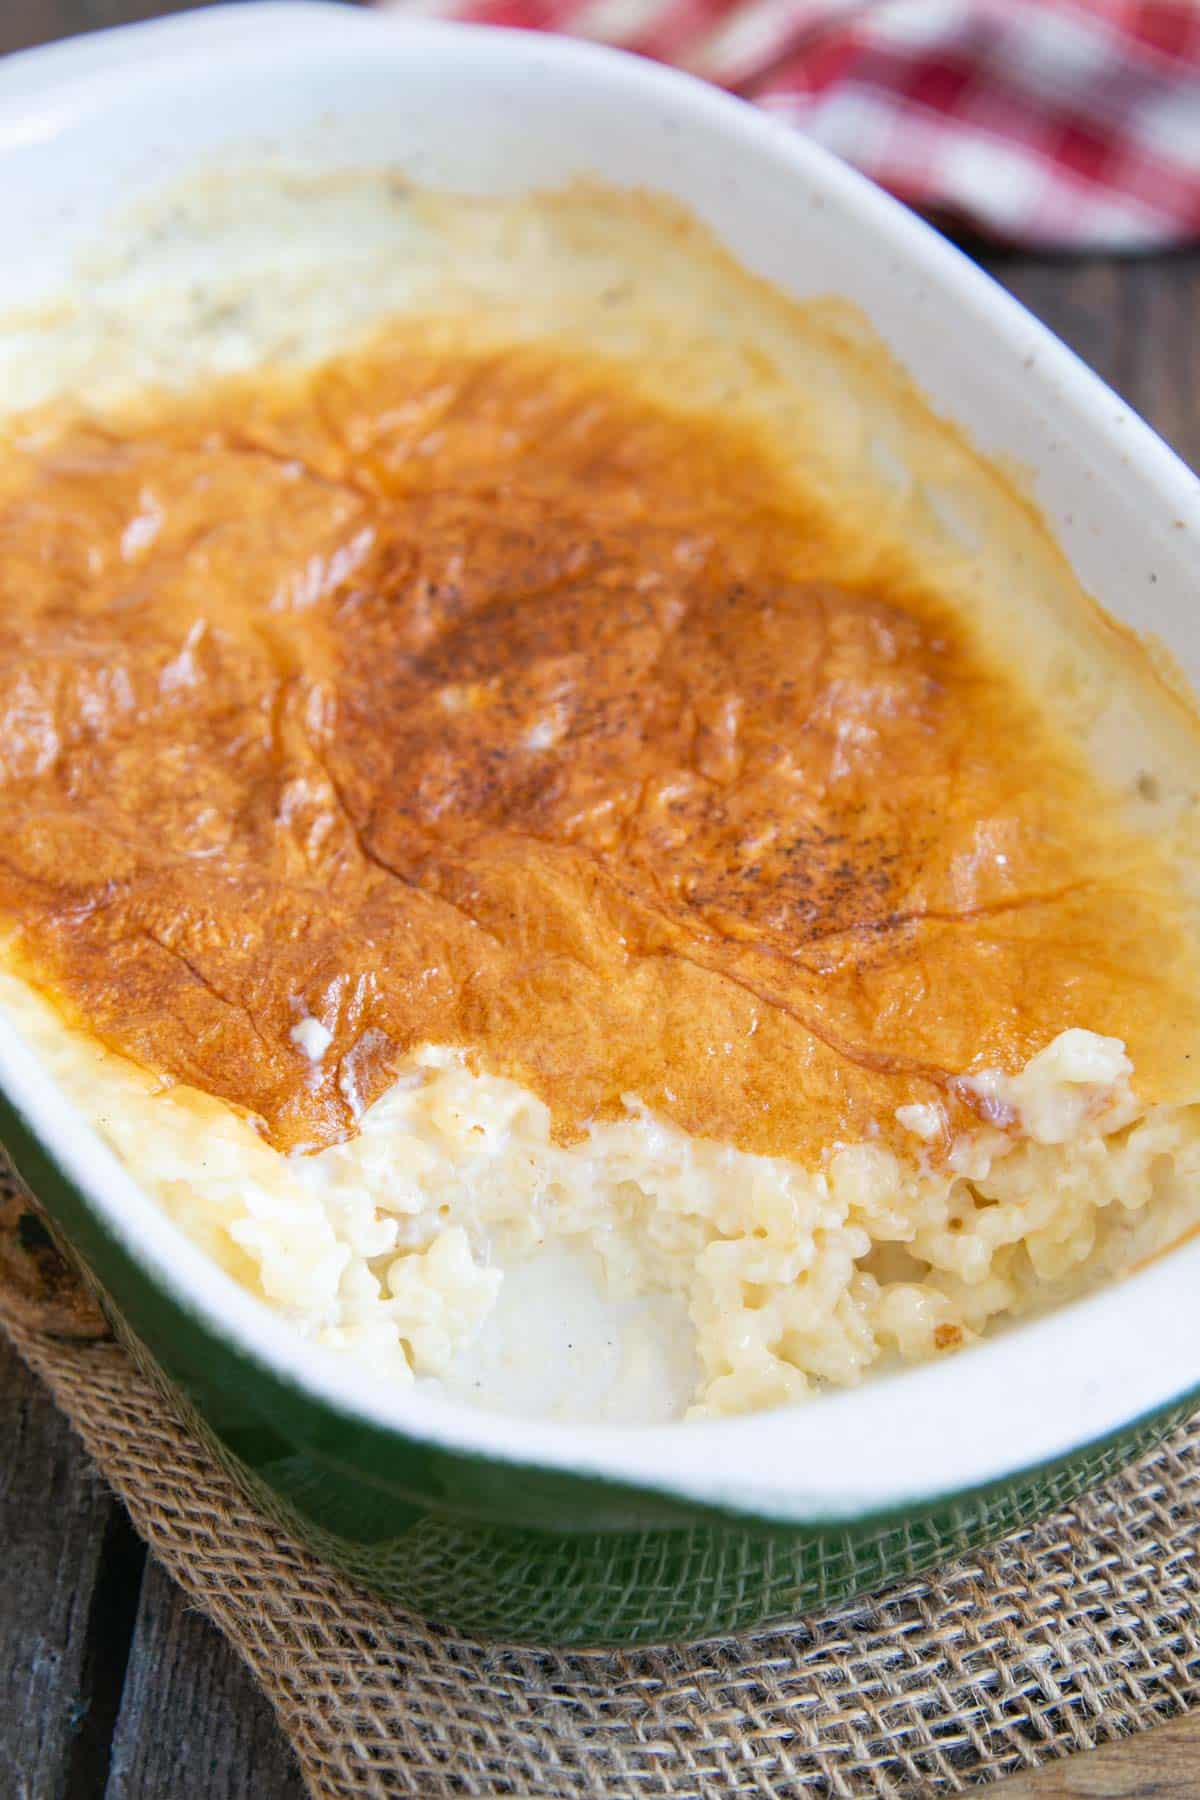 A delicious baked rice pudding, in a white and green serving dish, with one helping removed. The soft crust on the pudding is golden brown.